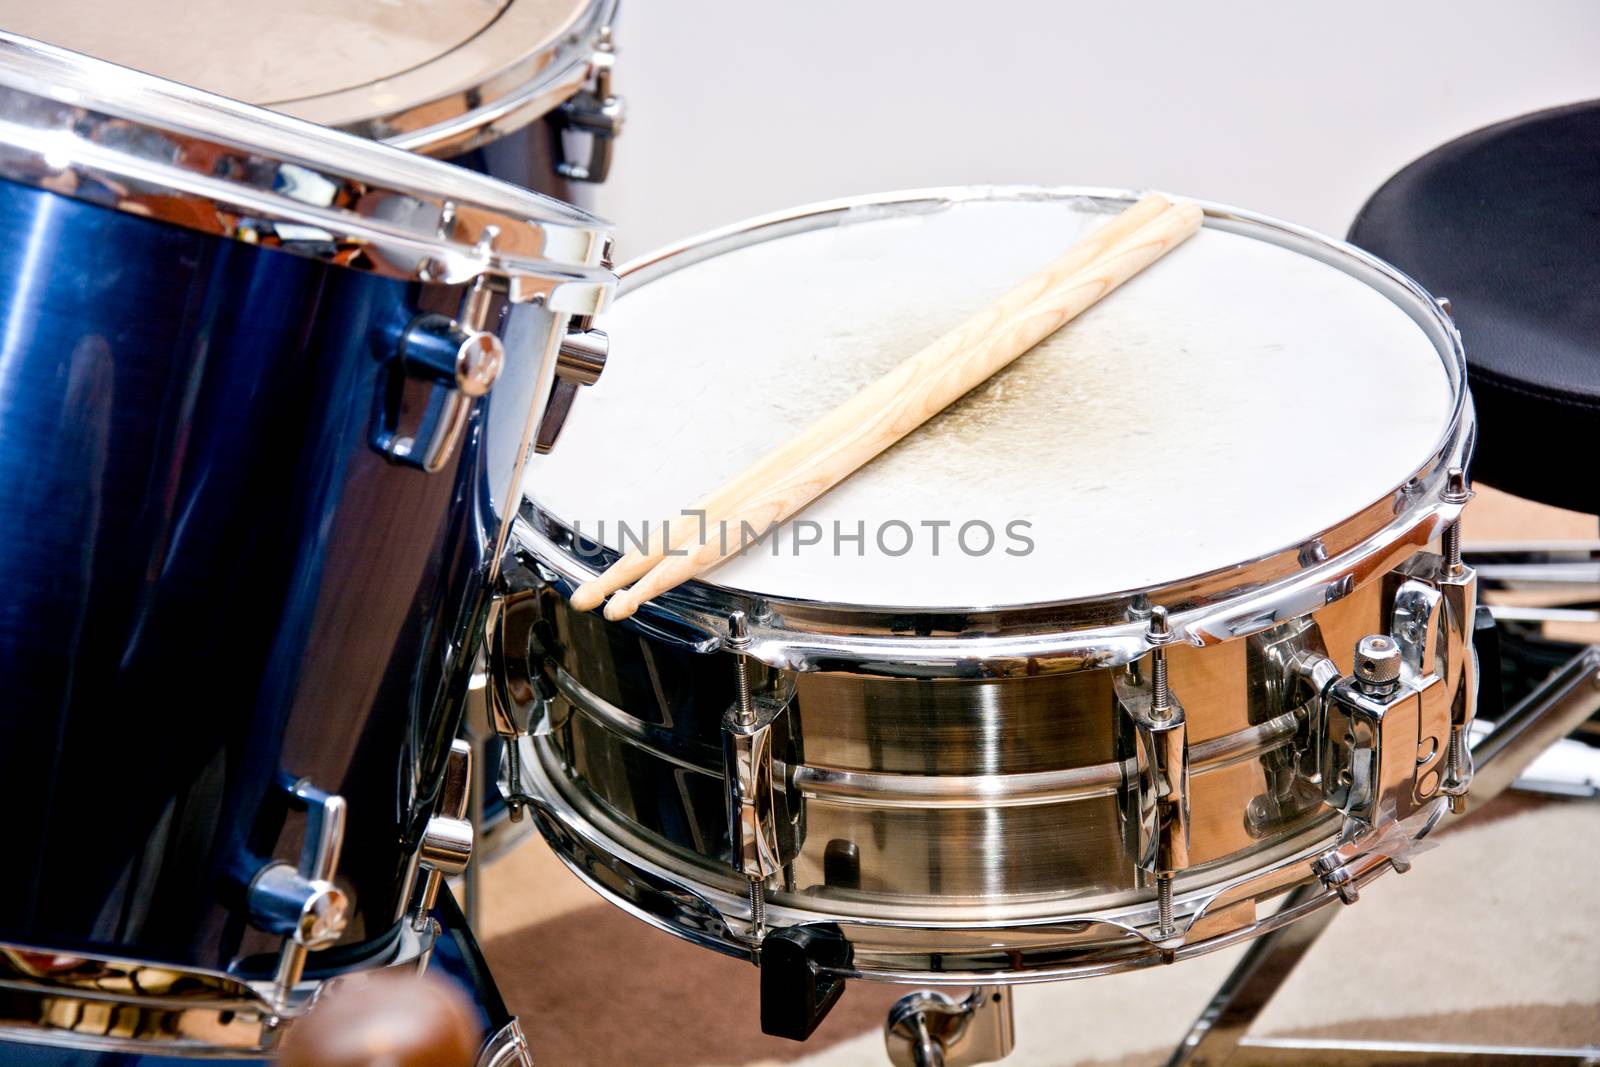 Drums conceptual image. Drumsticks lying on snare drum.